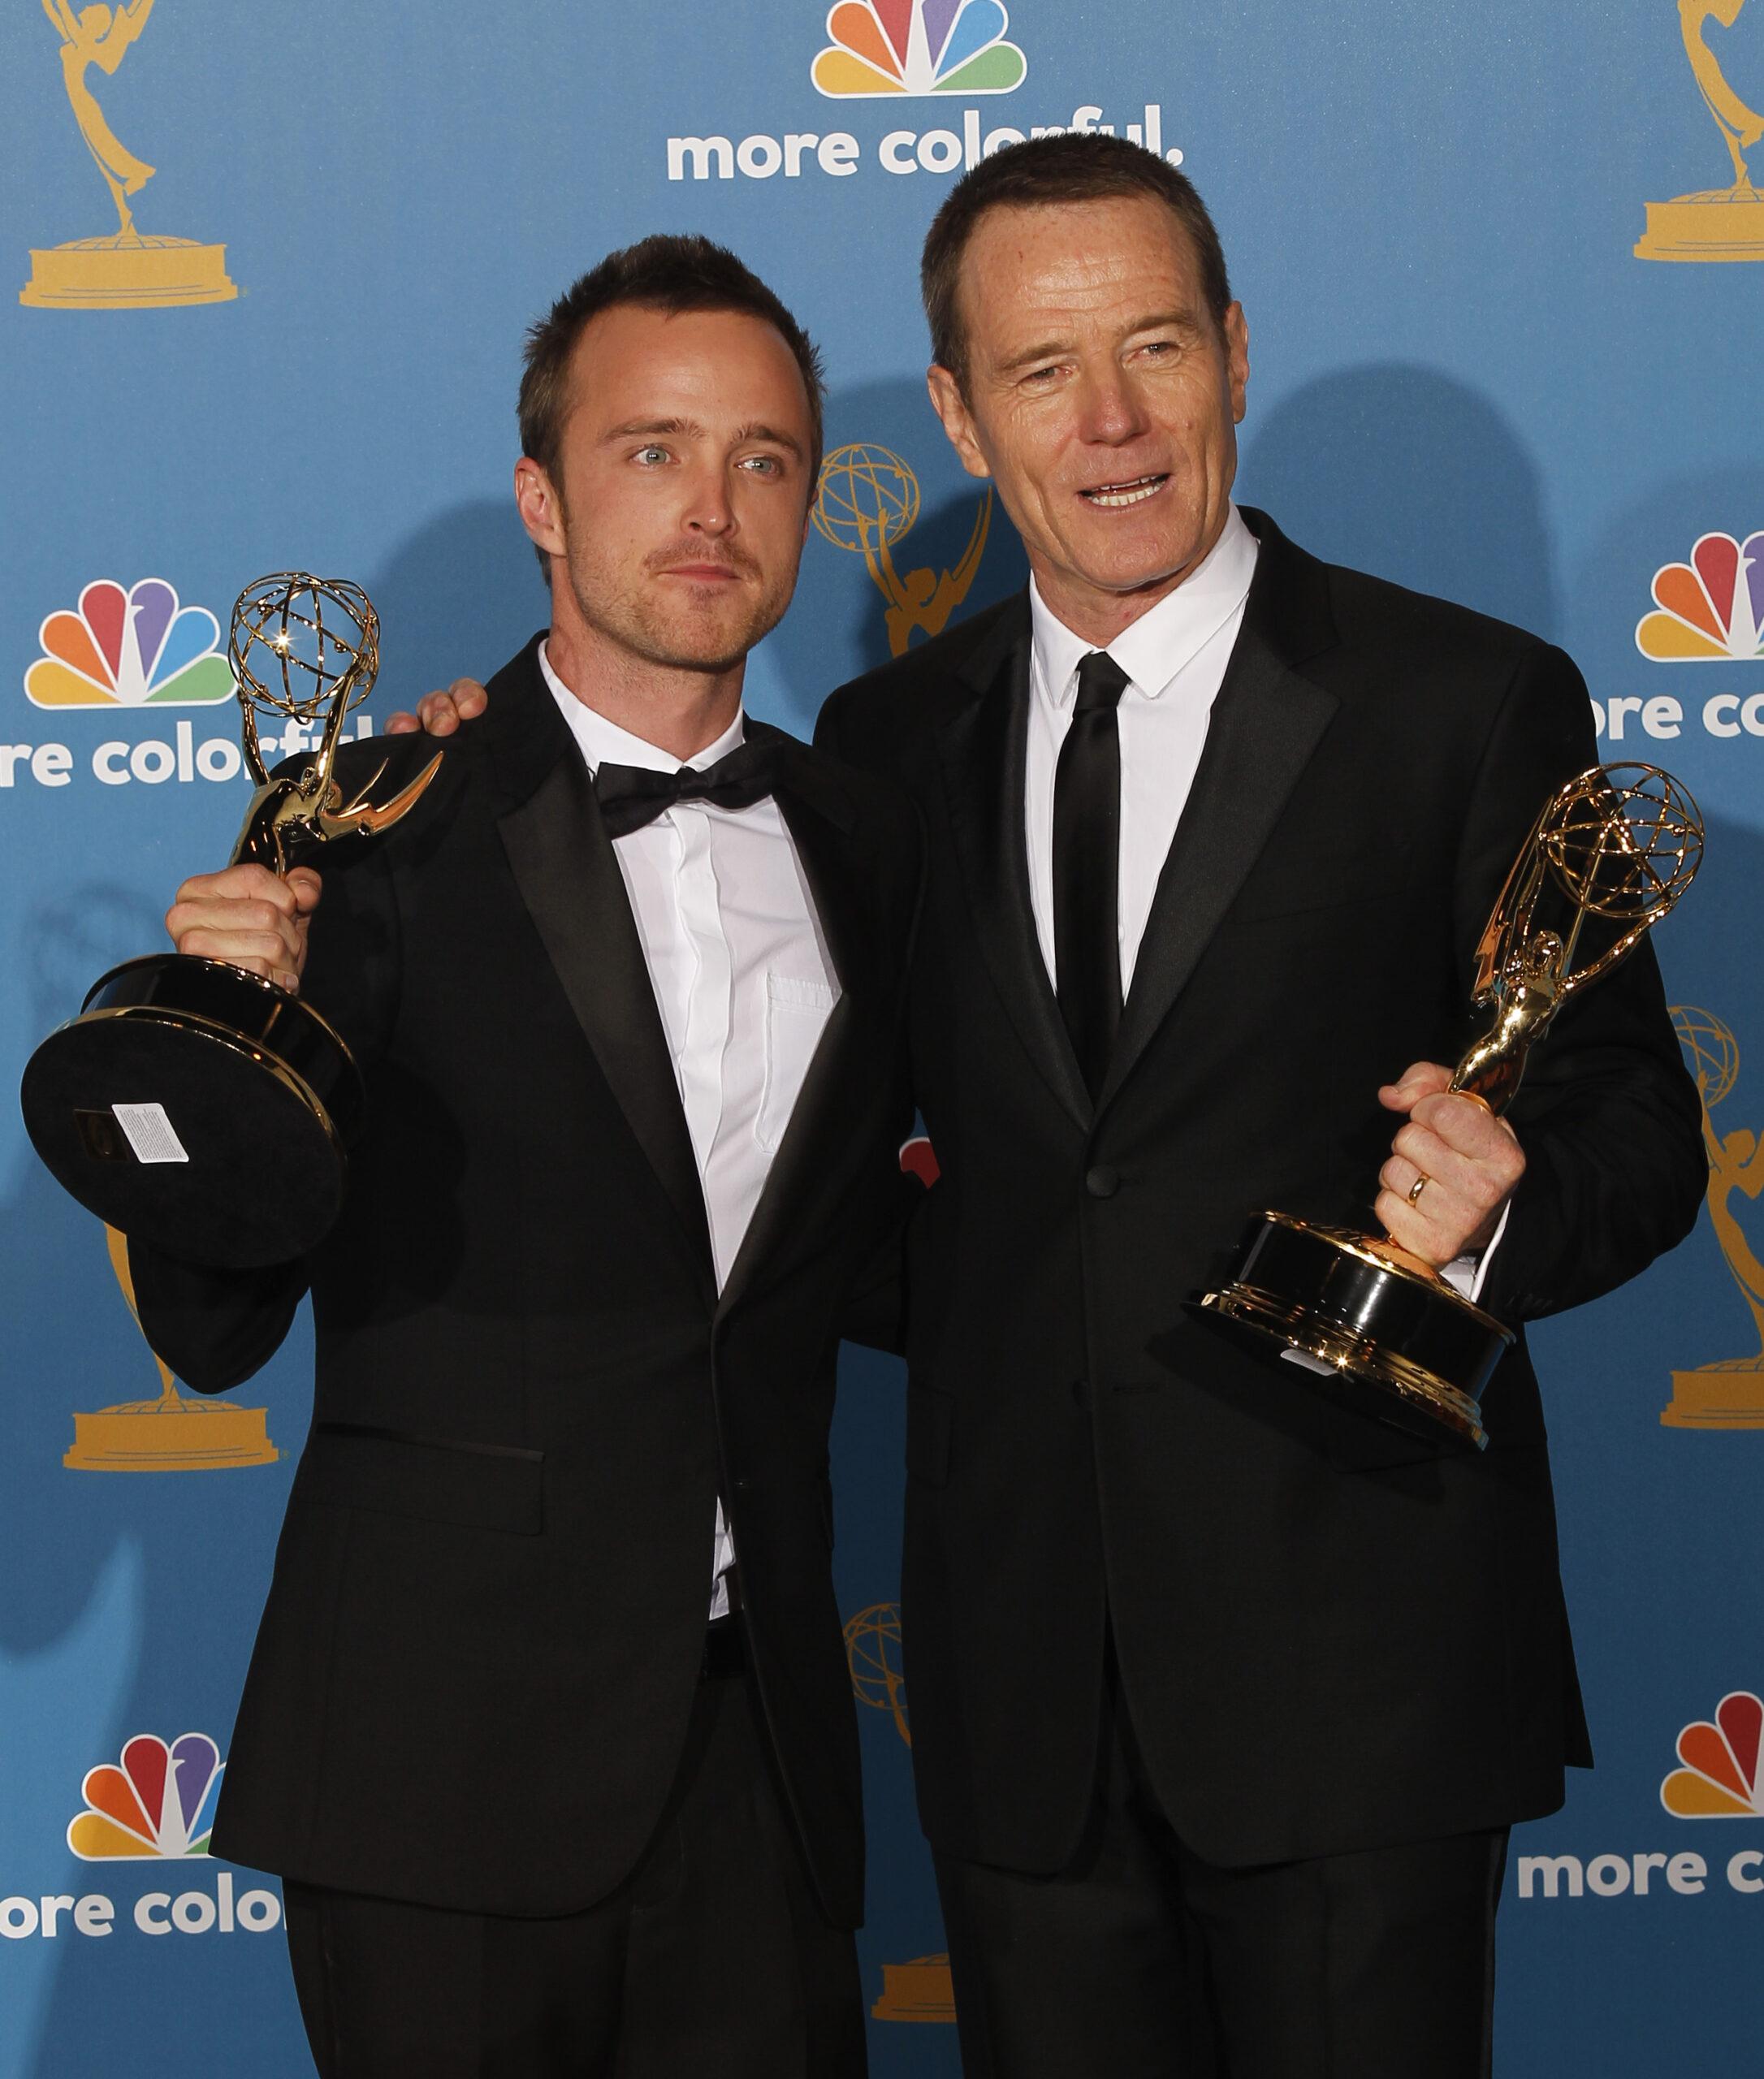 Aaron Paul and Bryan Cranston win at the 62nd Primetime Emmy Awards in Los Angeles